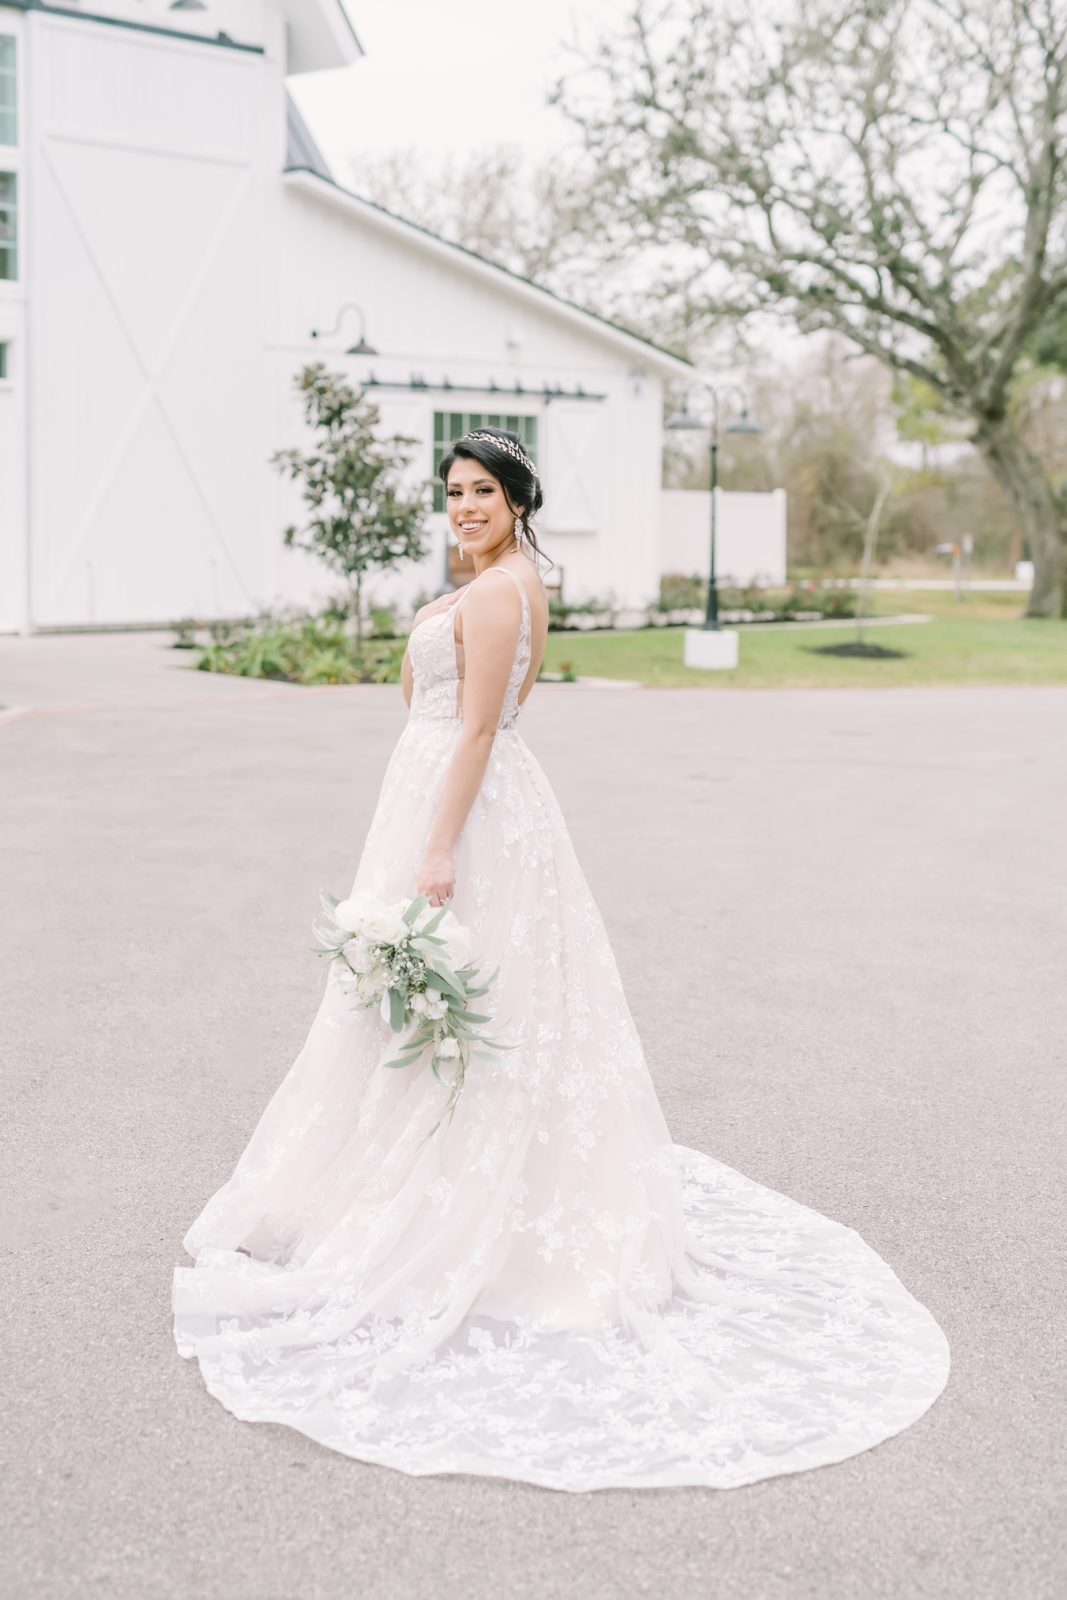 A bride wearing a princess cut wedding gown with lace details at a farmhouse by Christina Elliott Photography. lace white #ChristinaElliottPhotography #ChristinaElliottBridals #Houstonweddings #Farmhousewedding #TheSpringsVenue #BridalsHouston